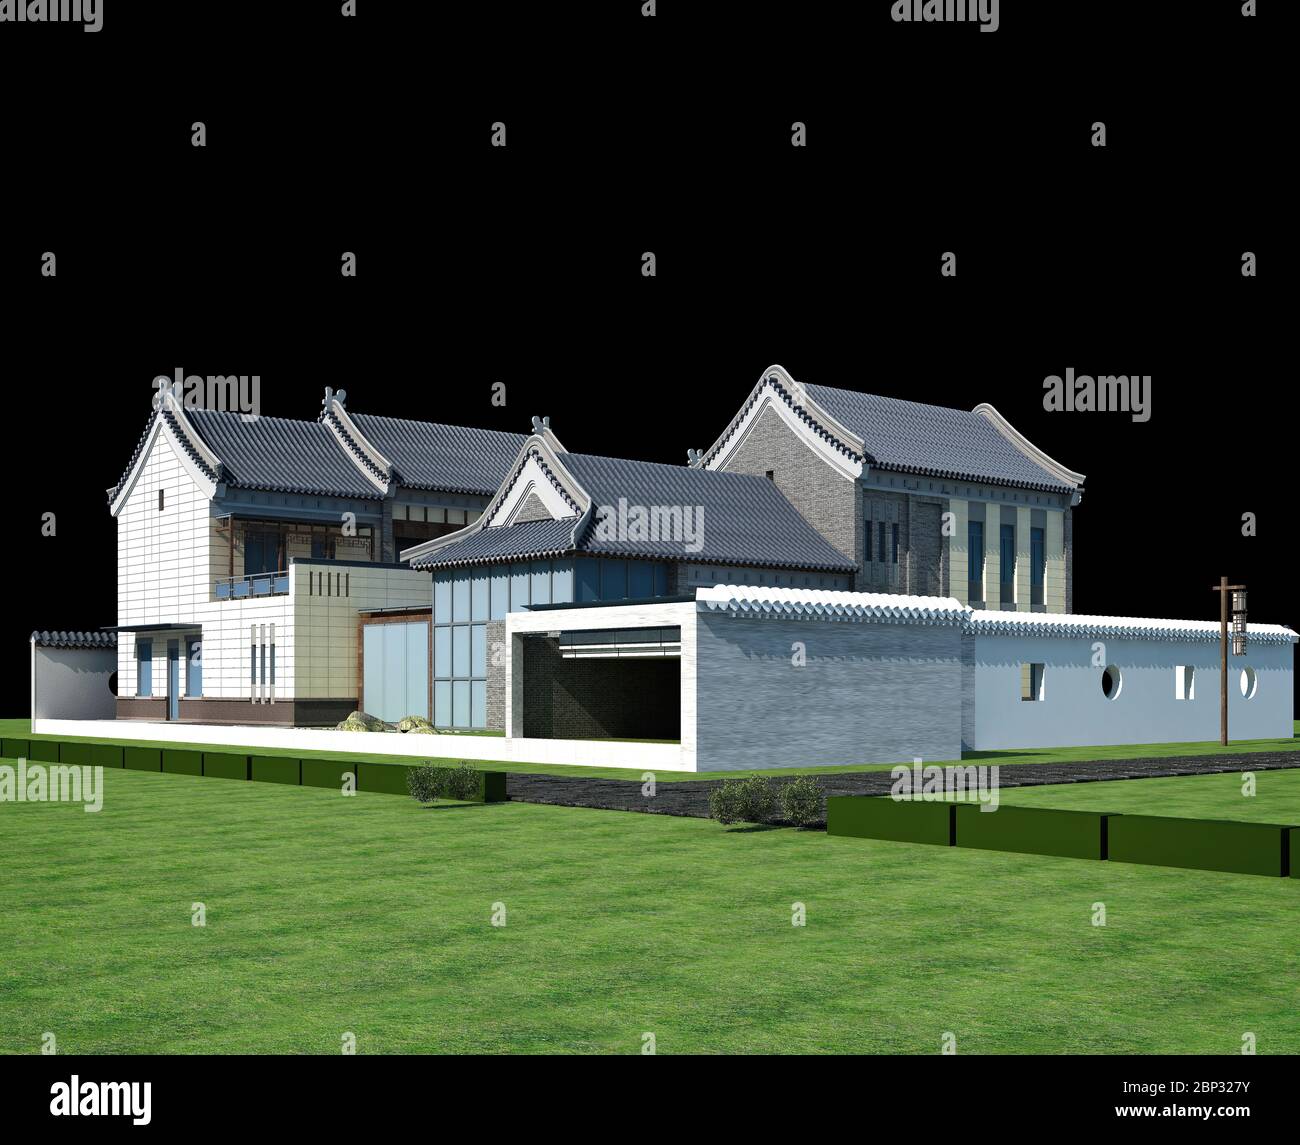 3d render of house exterior view Stock Photo